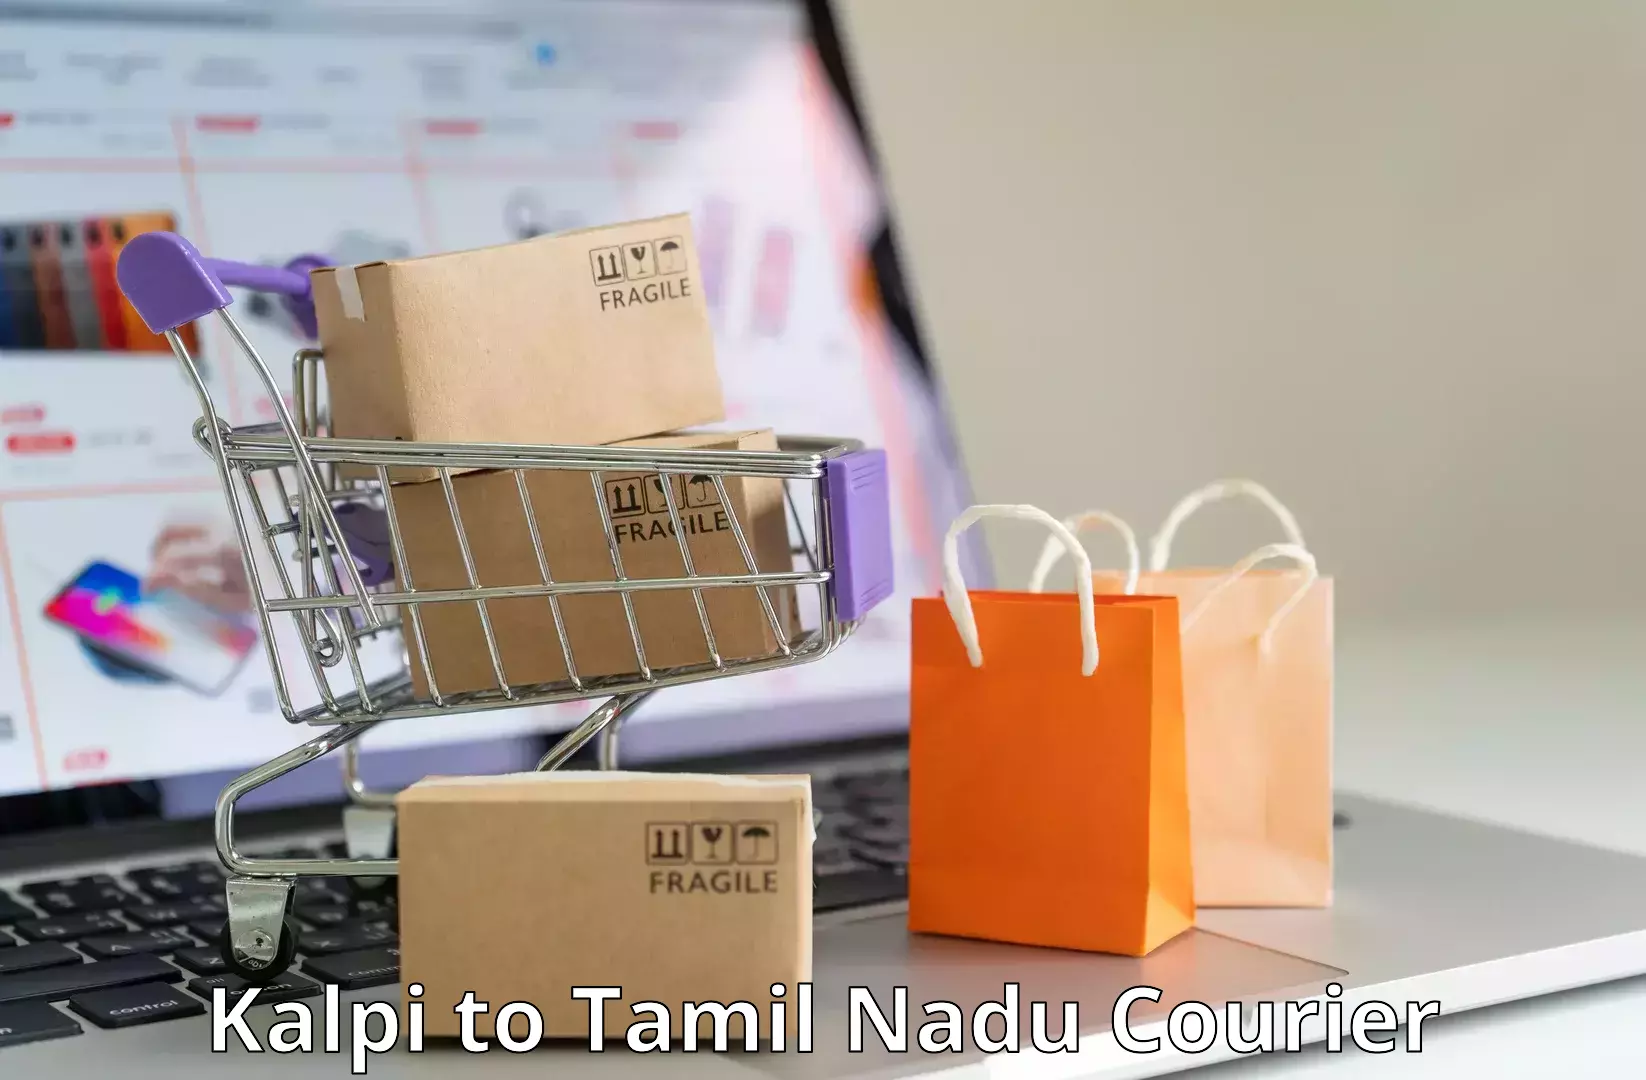 Sustainable shipping practices in Kalpi to Tamil Nadu